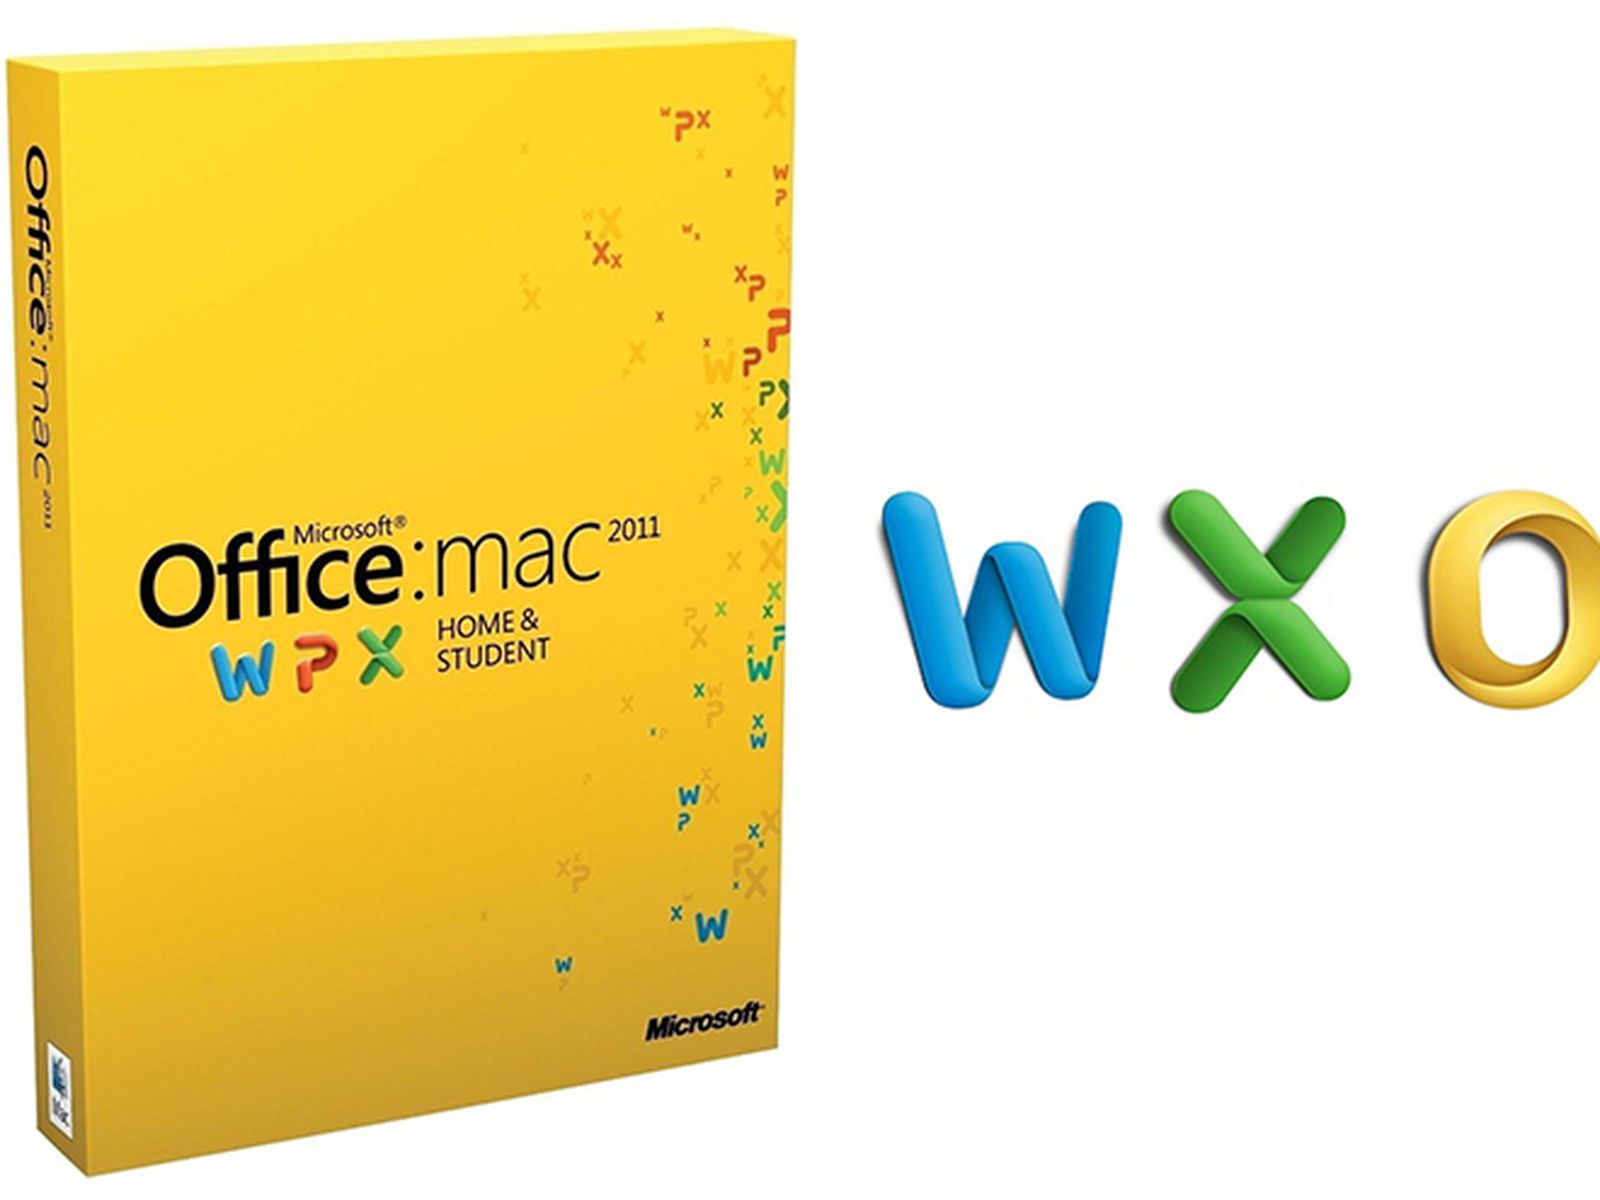 product key for office mac 2011